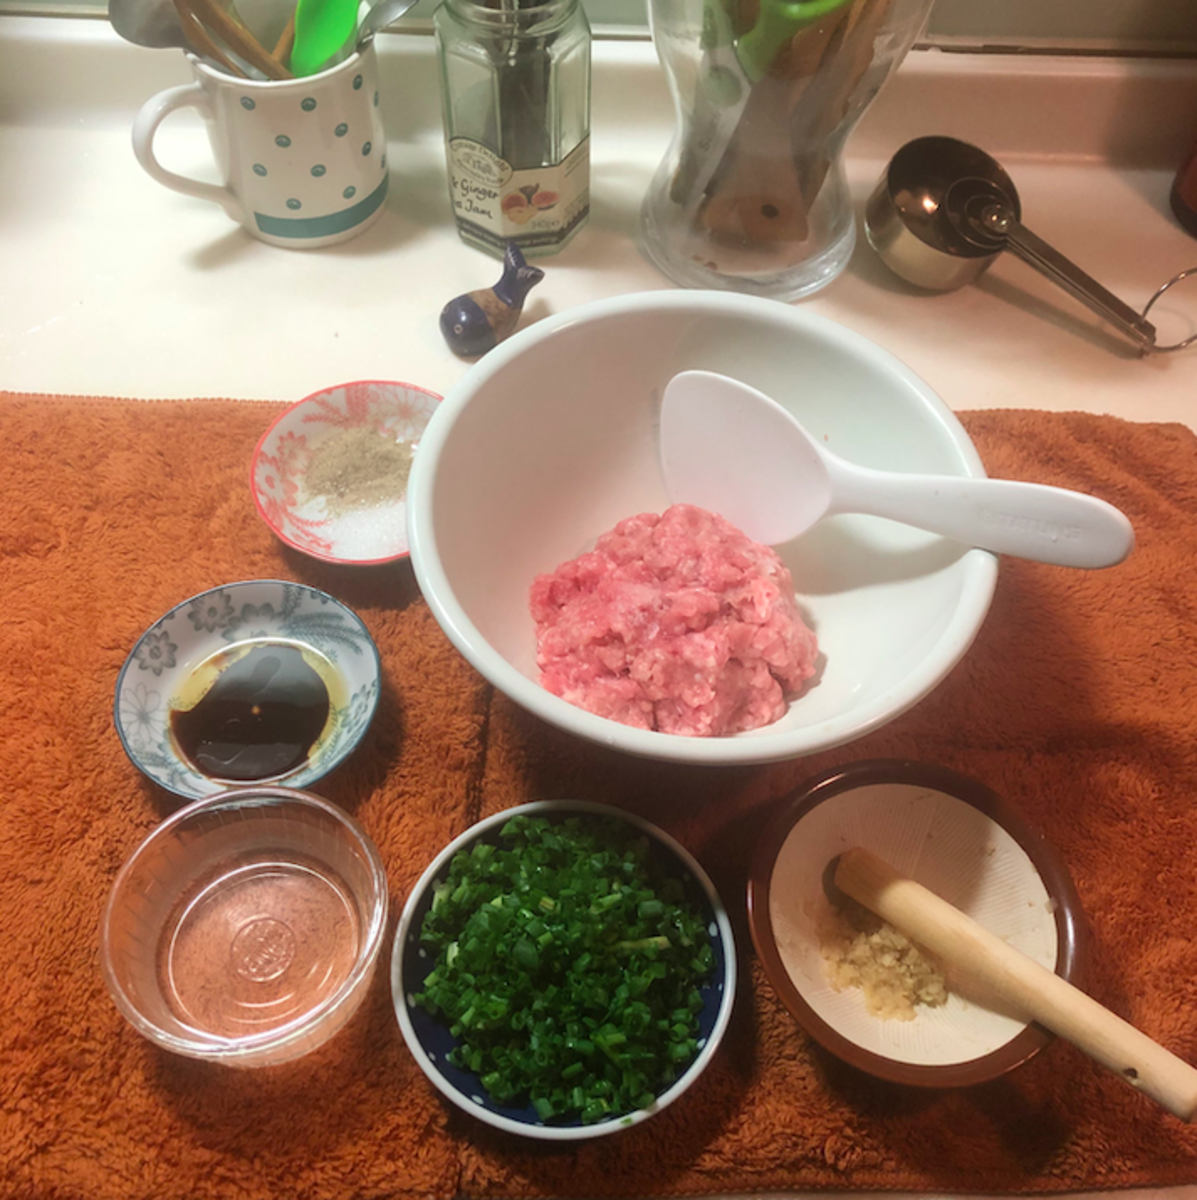 Ingredients for the filling